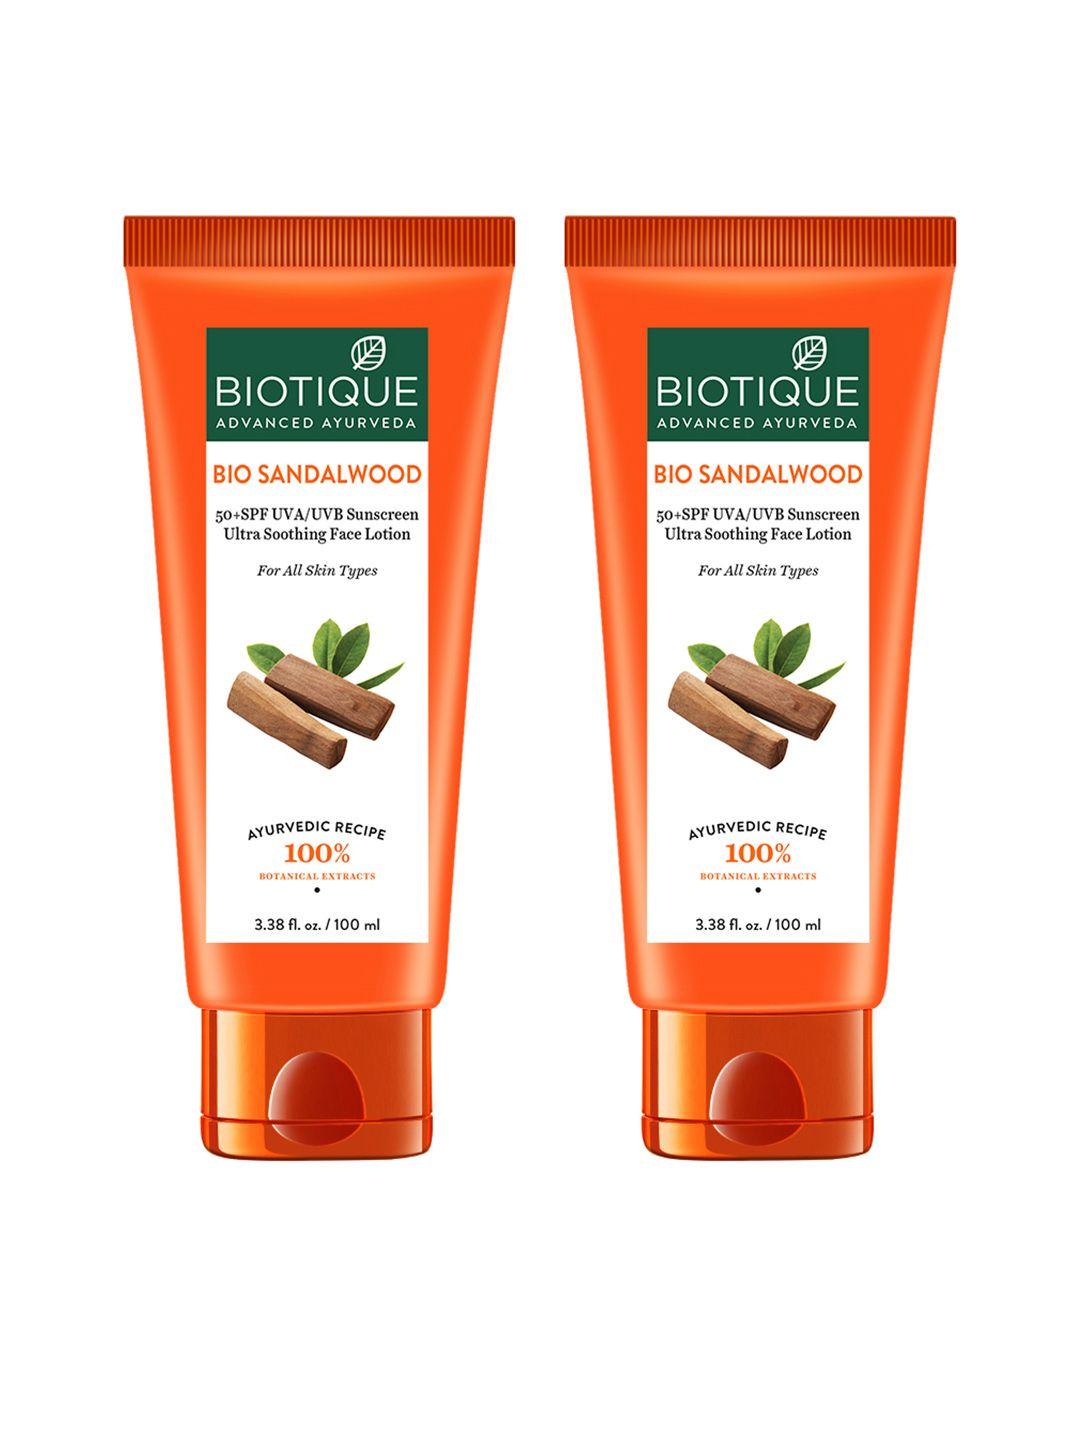 biotique set of 2 bio sandalwood sunscreen ultra soothing face lotion spf 50+ - 100ml each